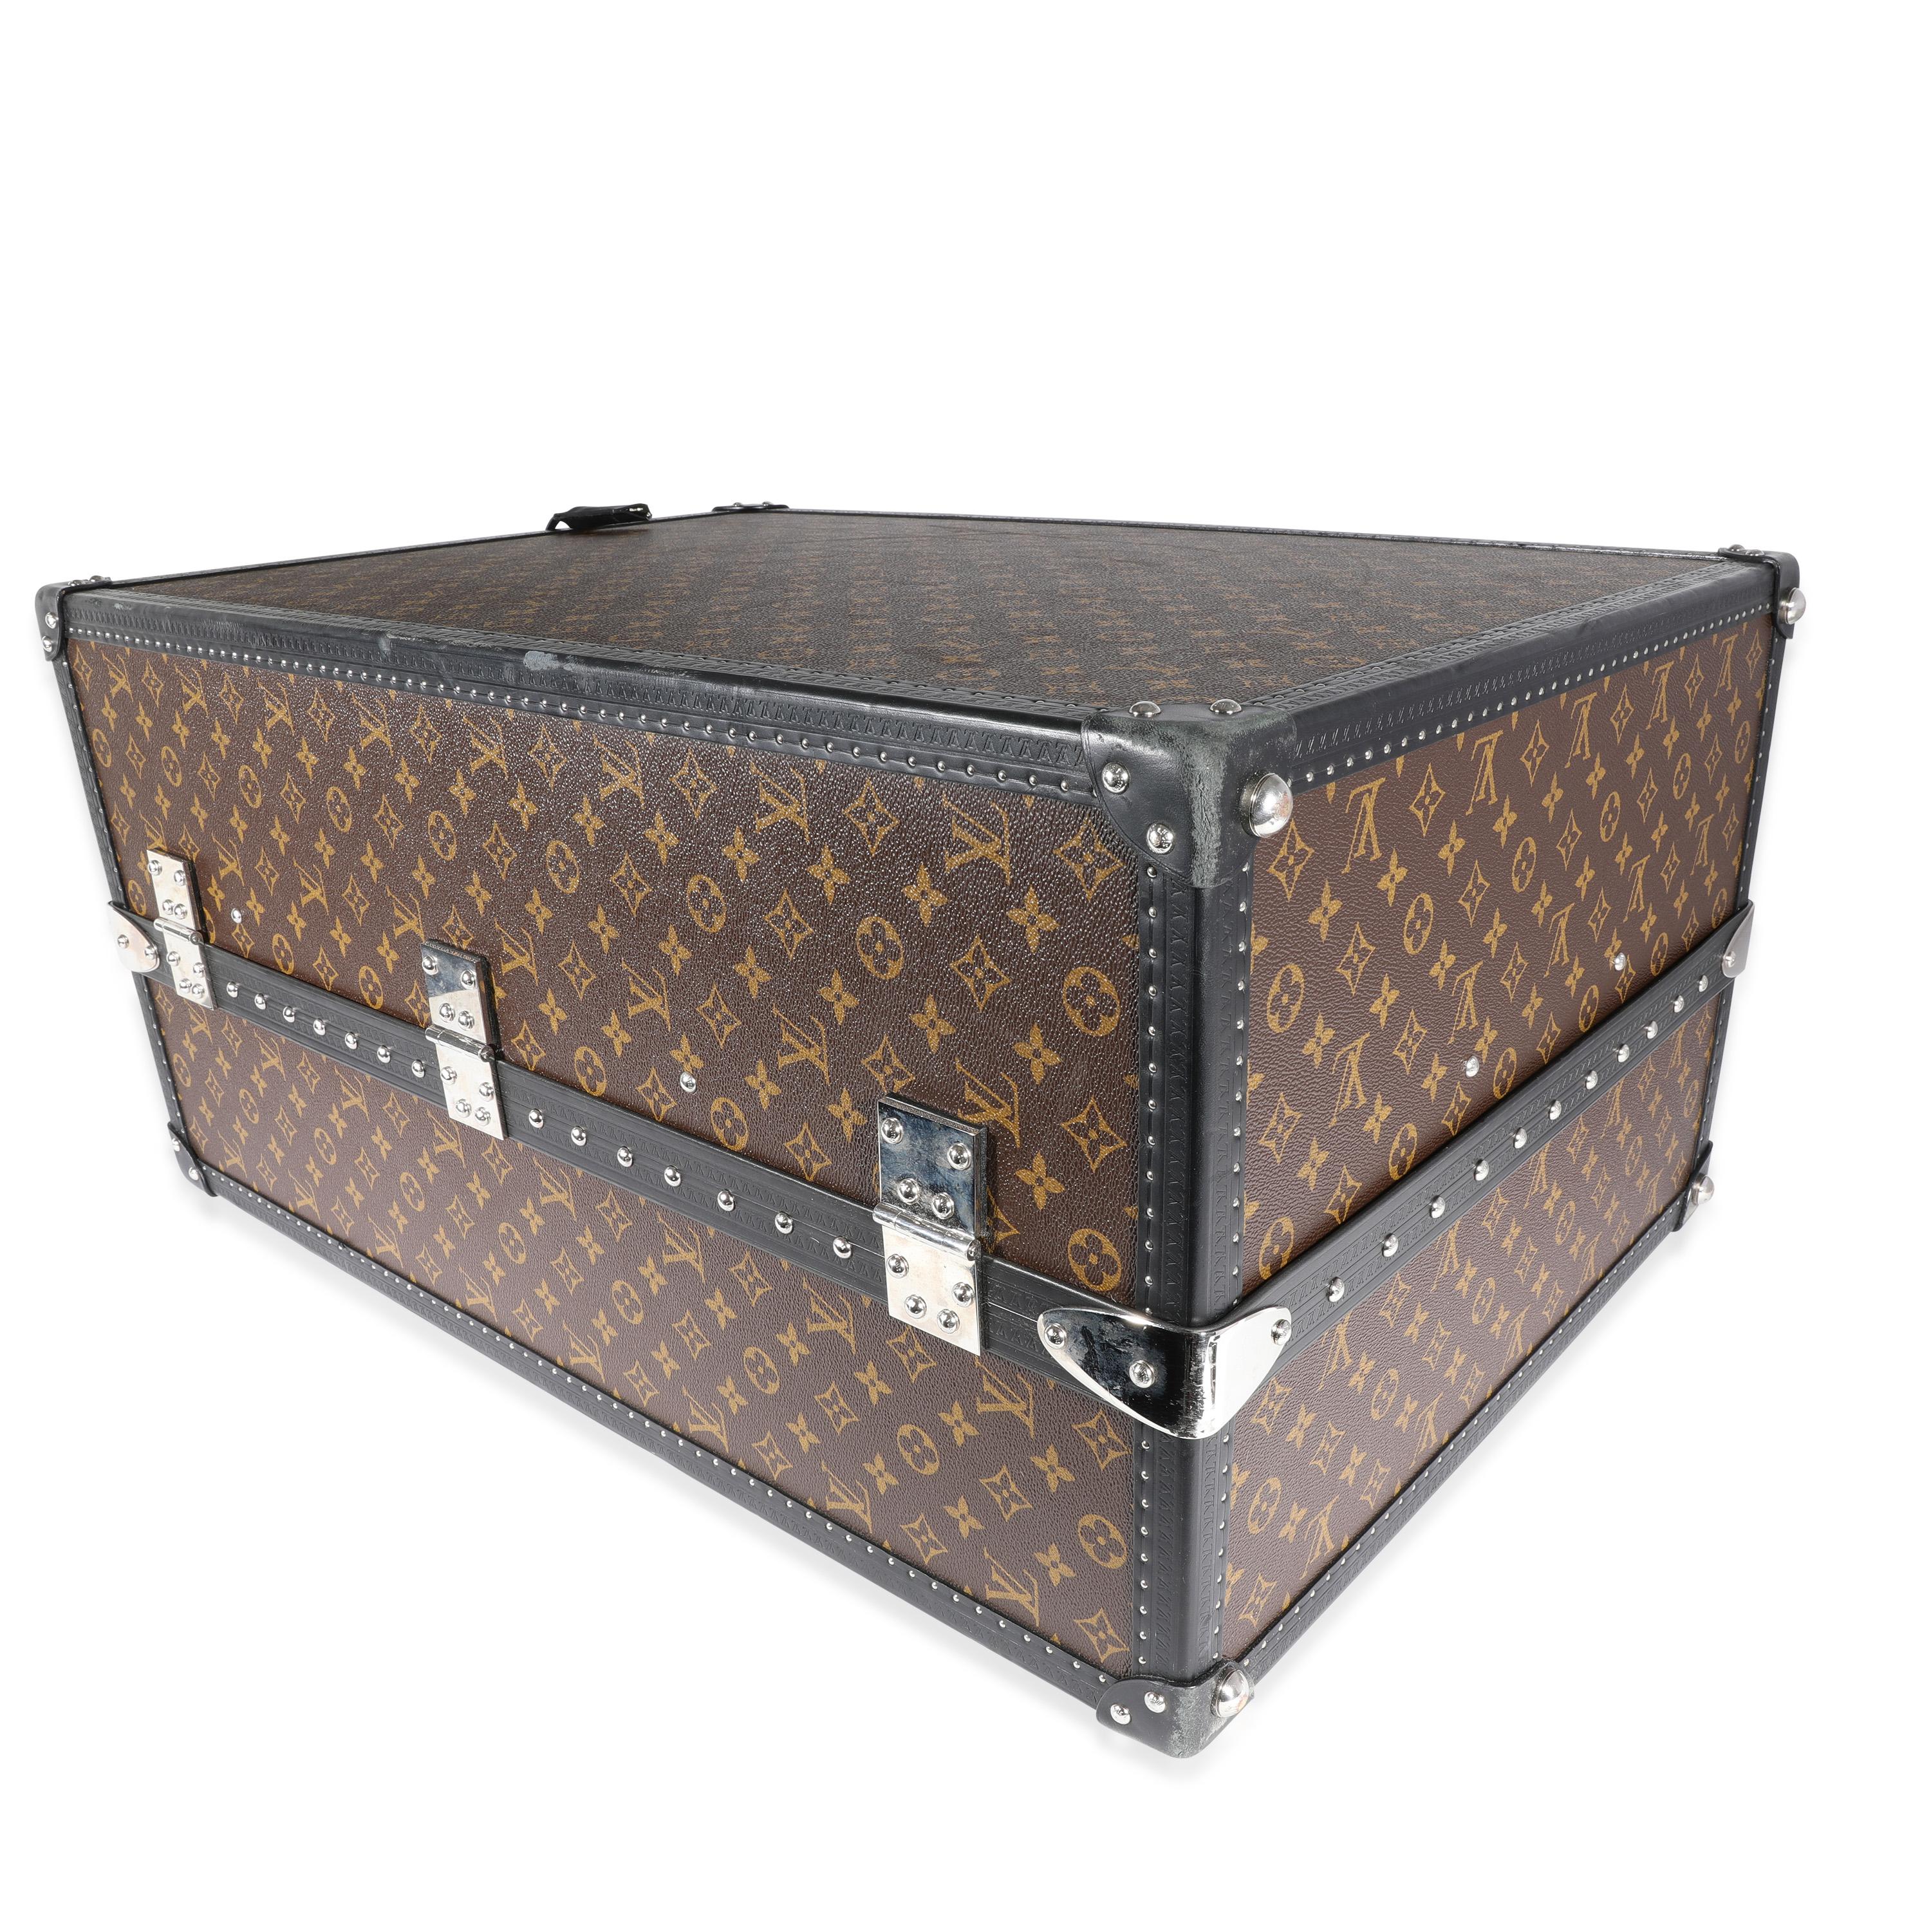 Listing Title: Louis Vuitton Monogram Macassar & Black Leather Custom 8 Compartment Shoe Trunk
SKU: 120963
Condition: Pre-owned 
Handbag Condition: Good
Condition Comments: Good Condition. Scuffing to corners, exterior, and handle. Light